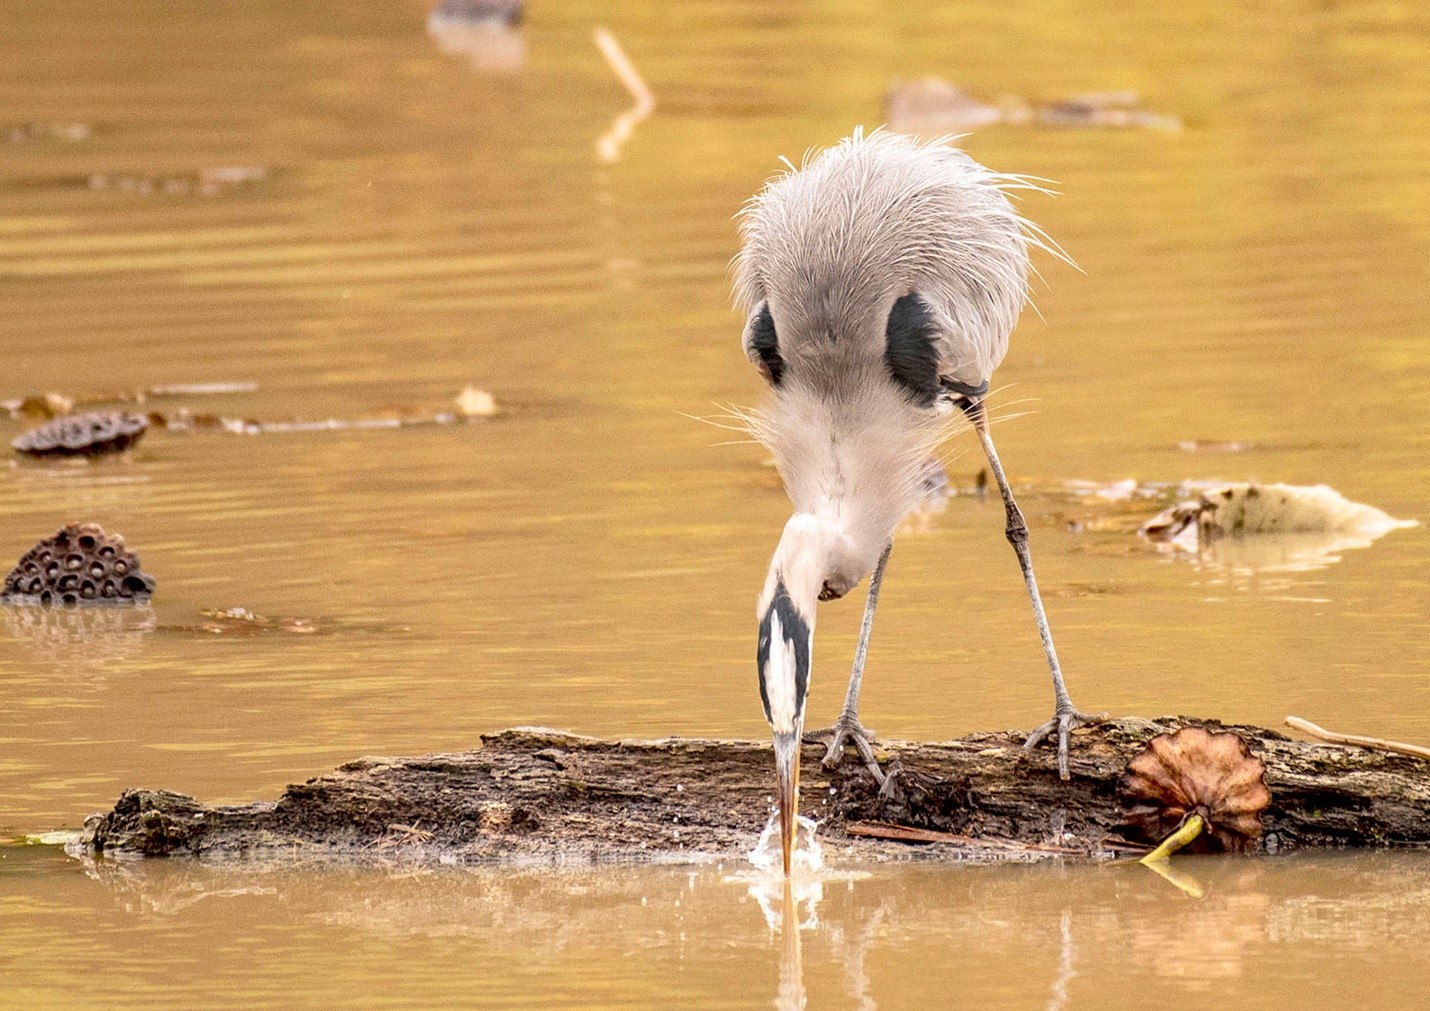 A large gray, black, and white bird with long legs is standing on a log, leaning over with the tip of its beak in the water.